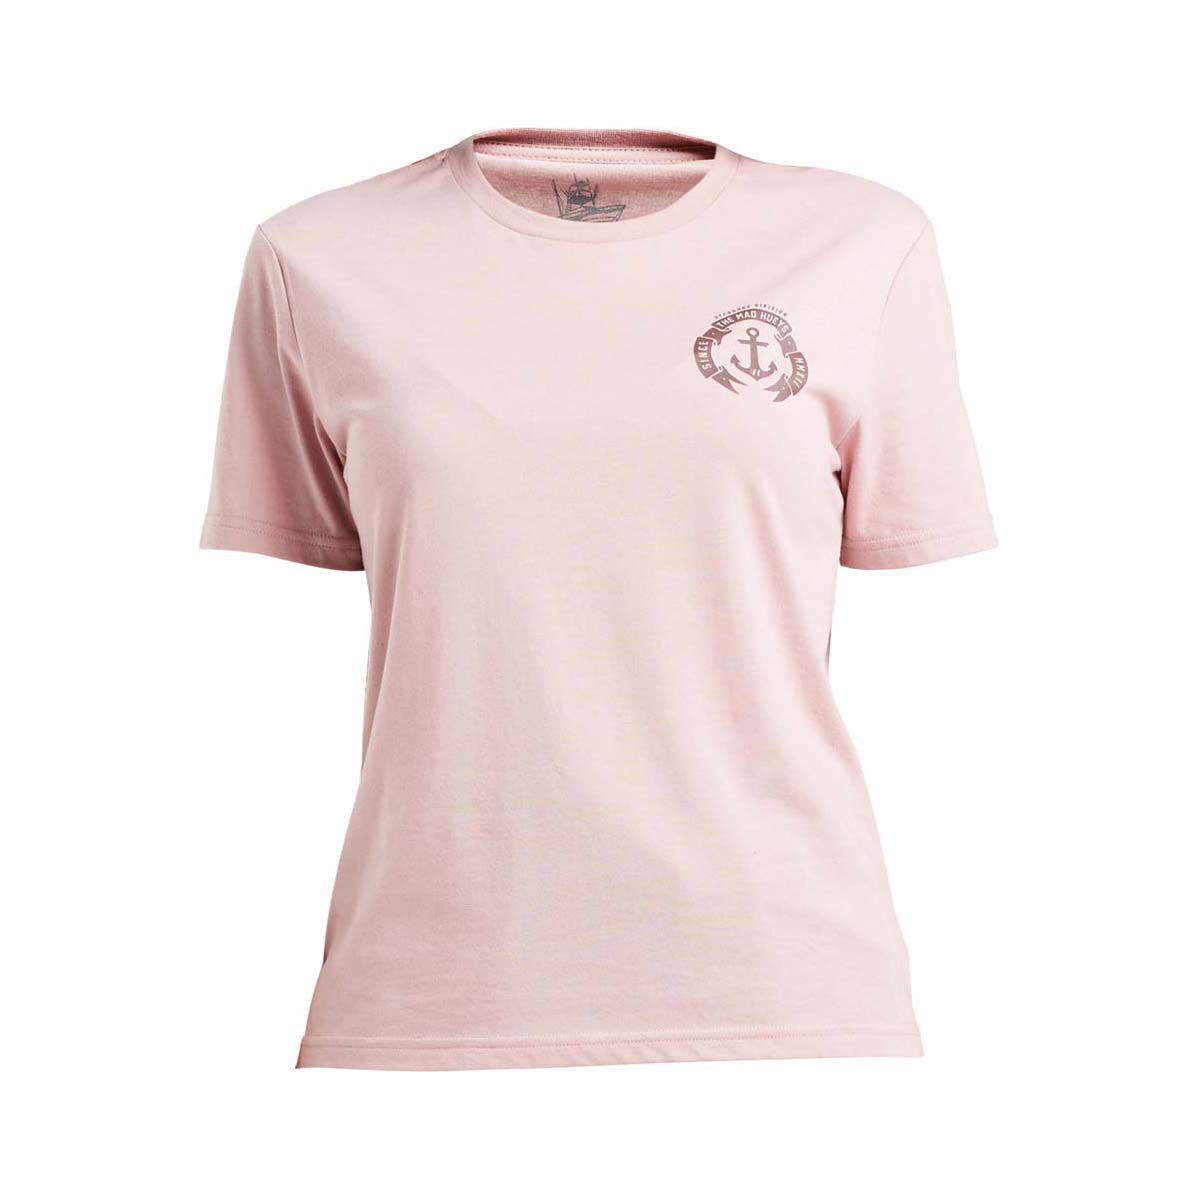 The Mad Hueys Women's Offshore Anchor Short Sleeve UV Tee Rose XS | BCF